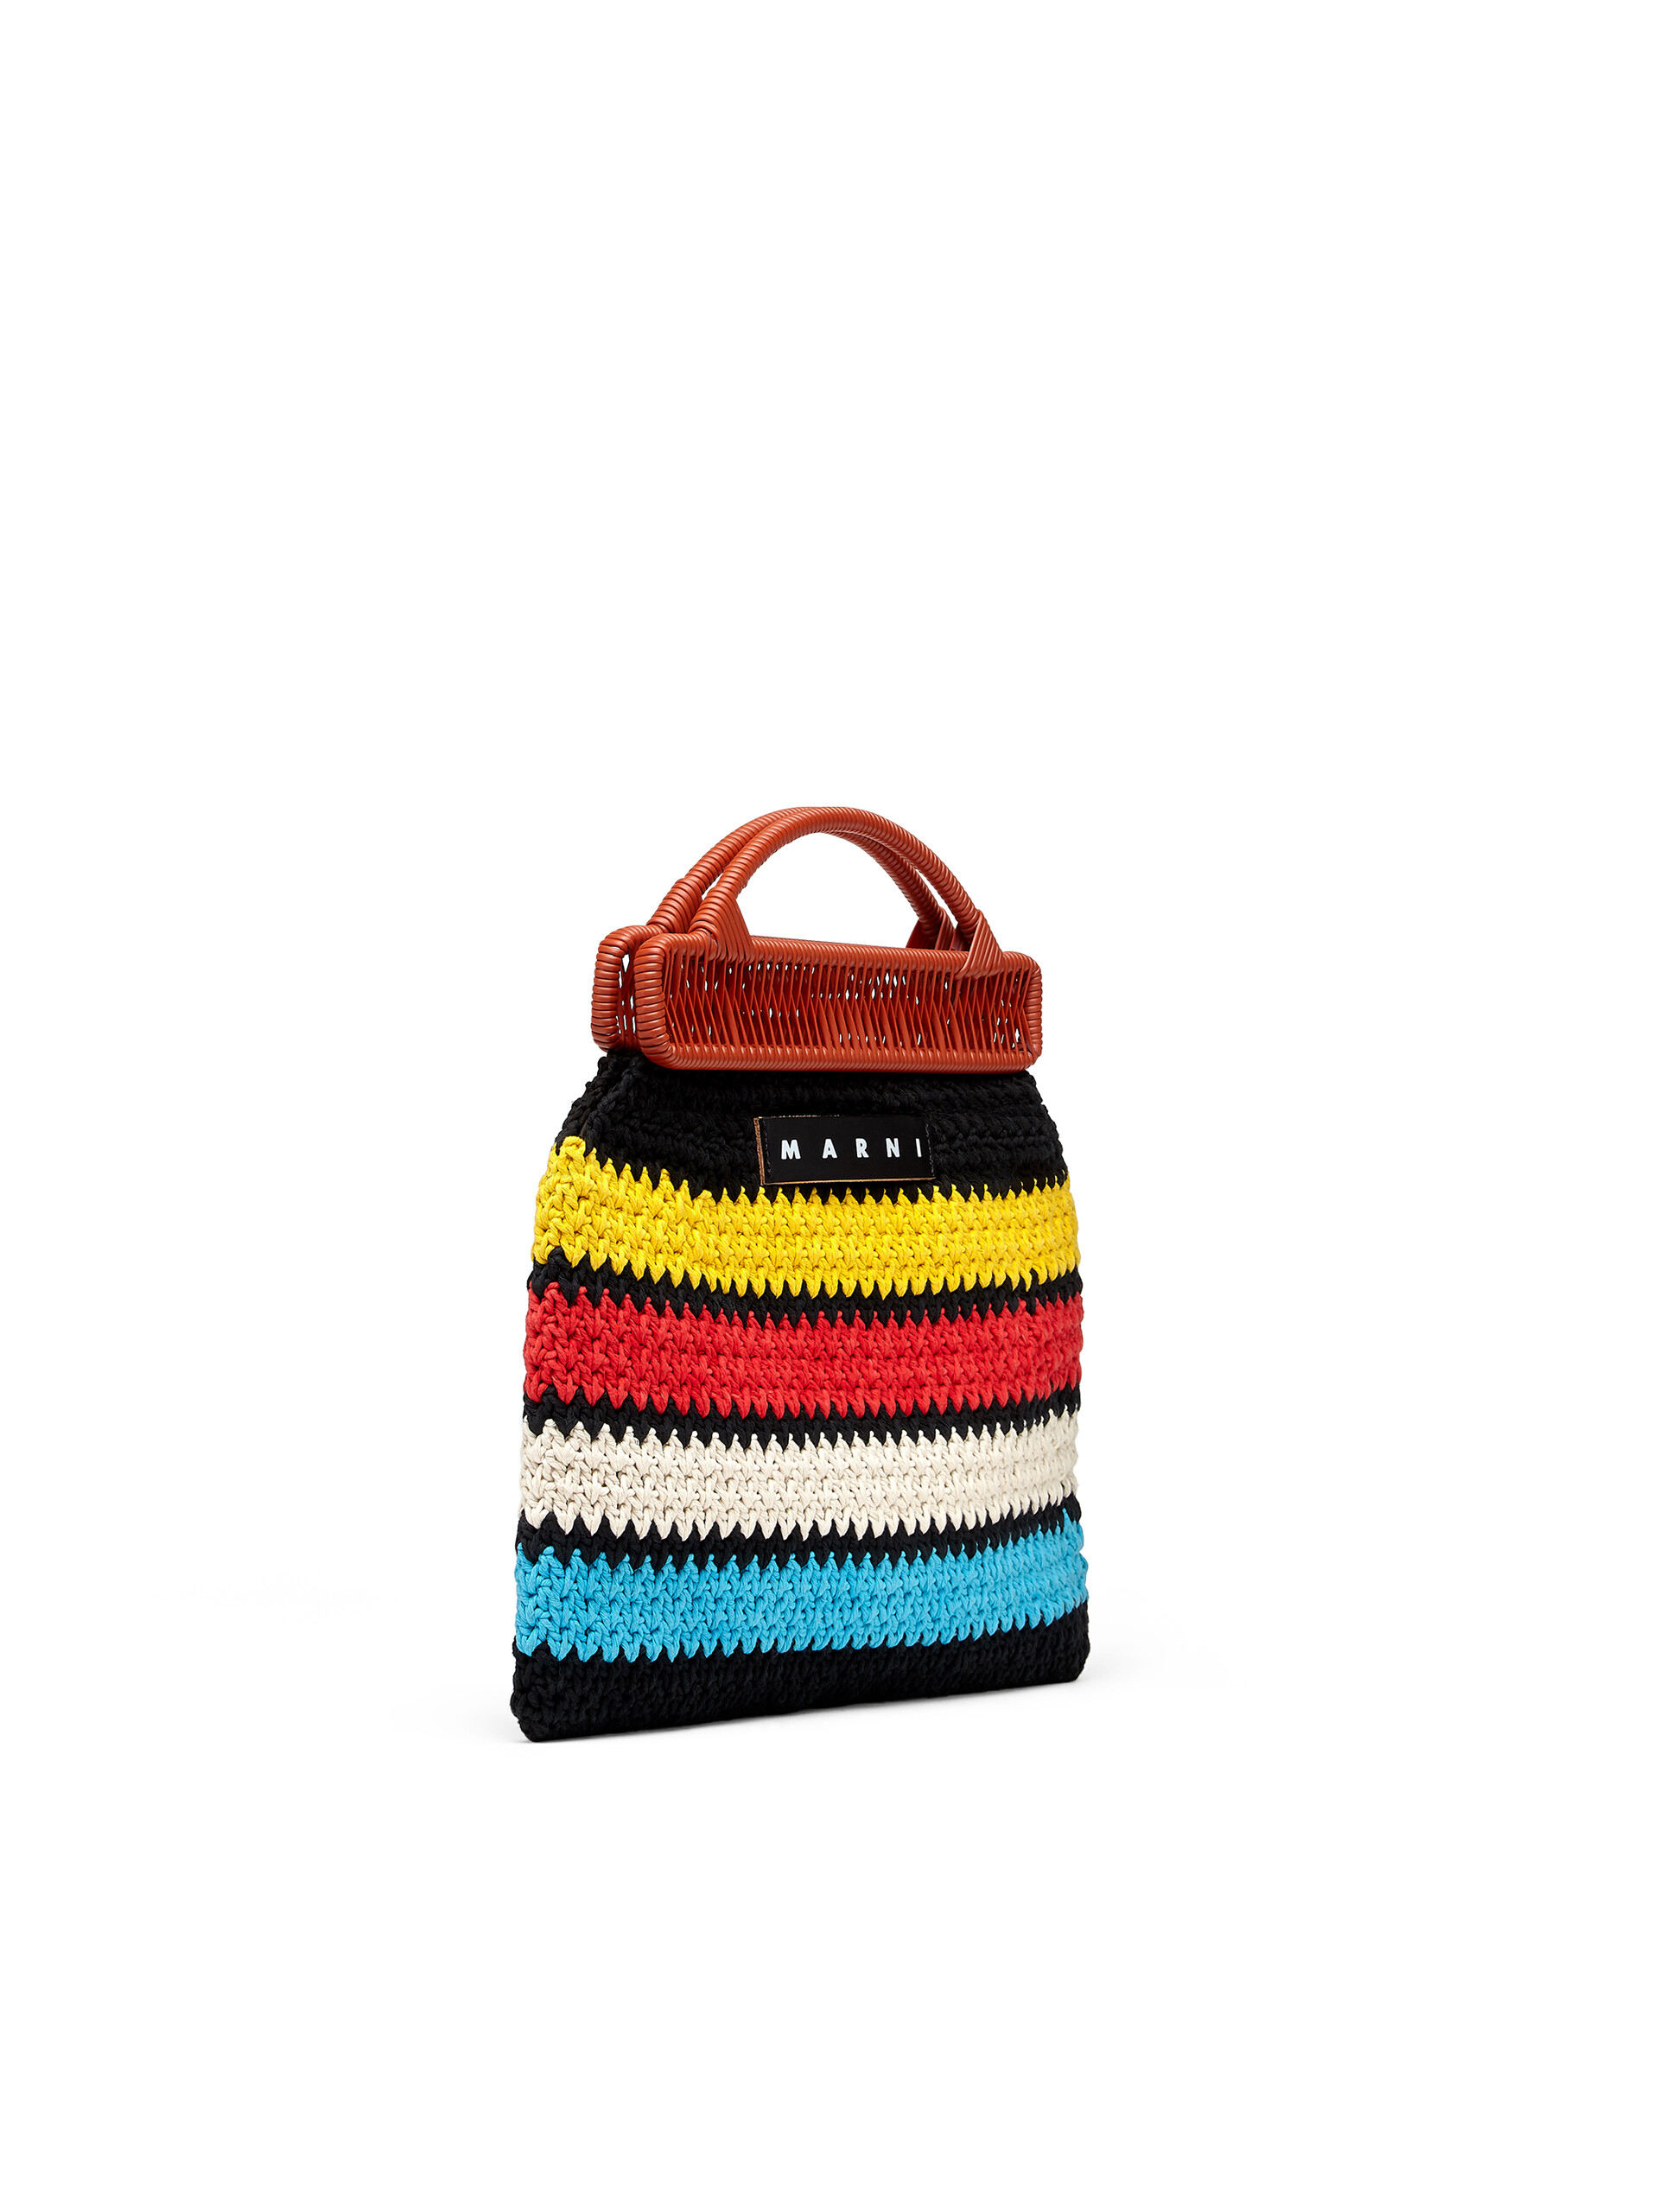 MARNI MARKET frame bag with striped motif in yellow, red, white, pale blue and black crochet cotton blend - Furniture - Image 2